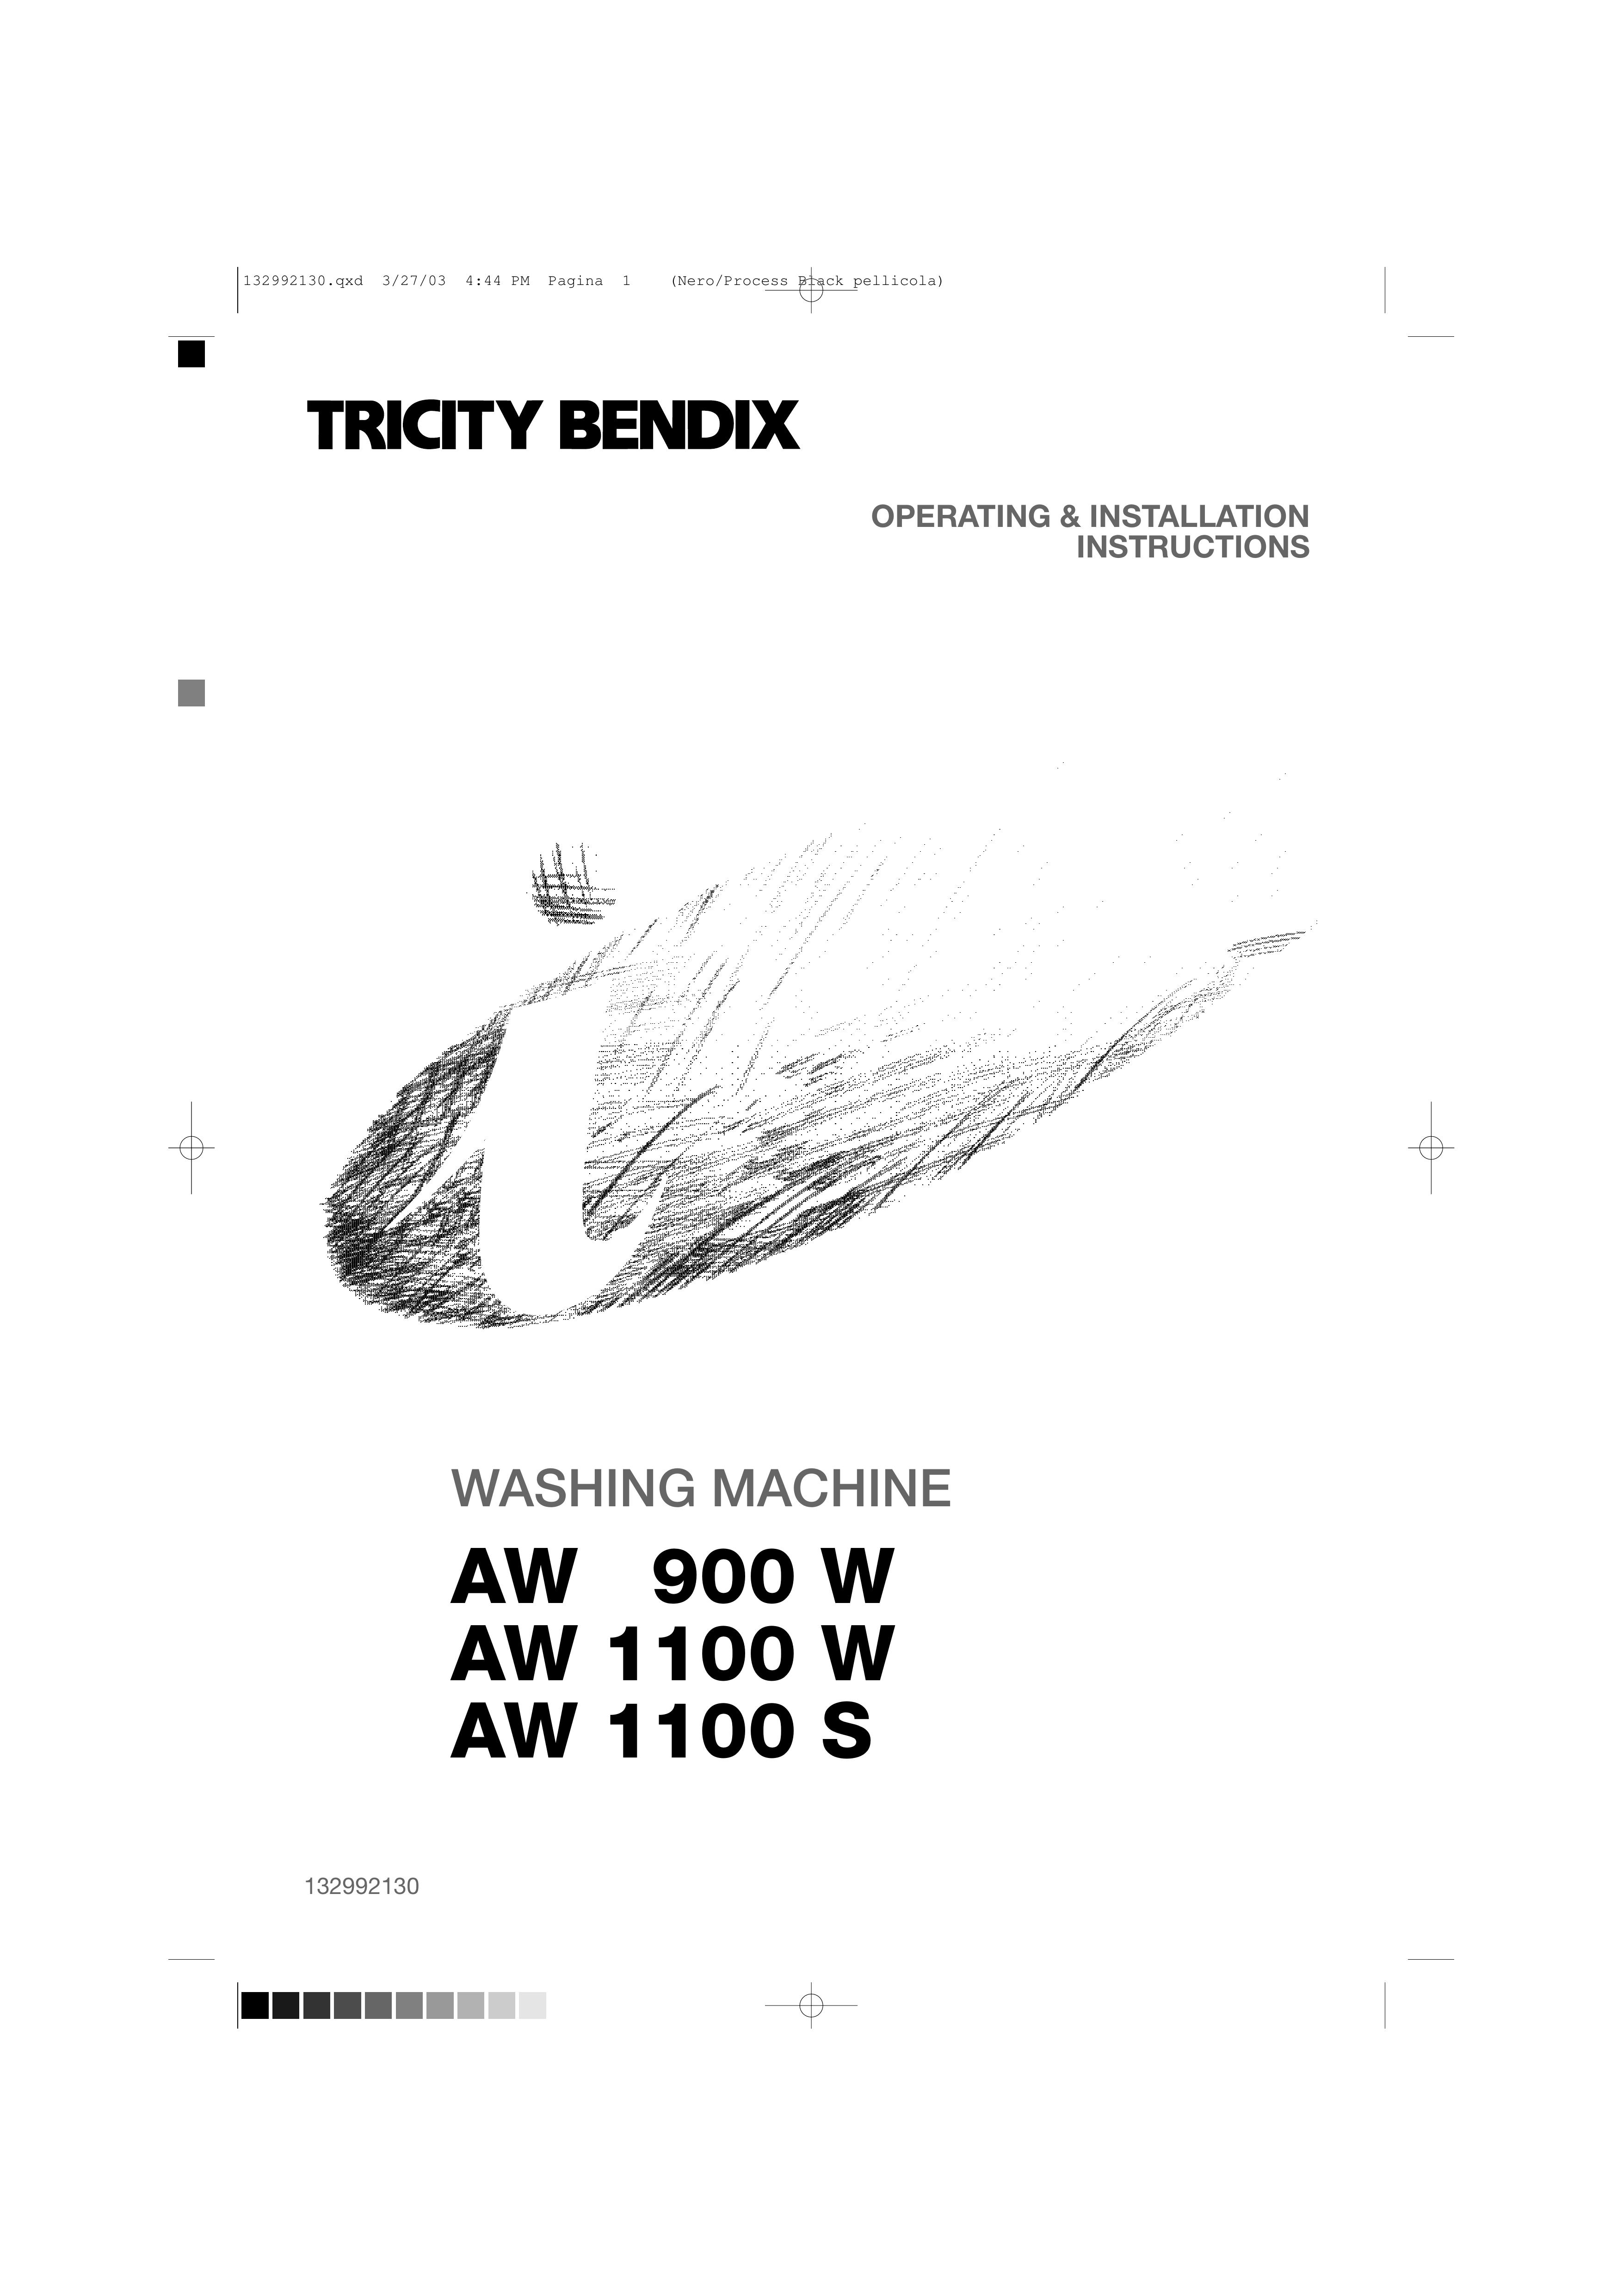 Tricity Bendix AW 900 W Washer User Manual